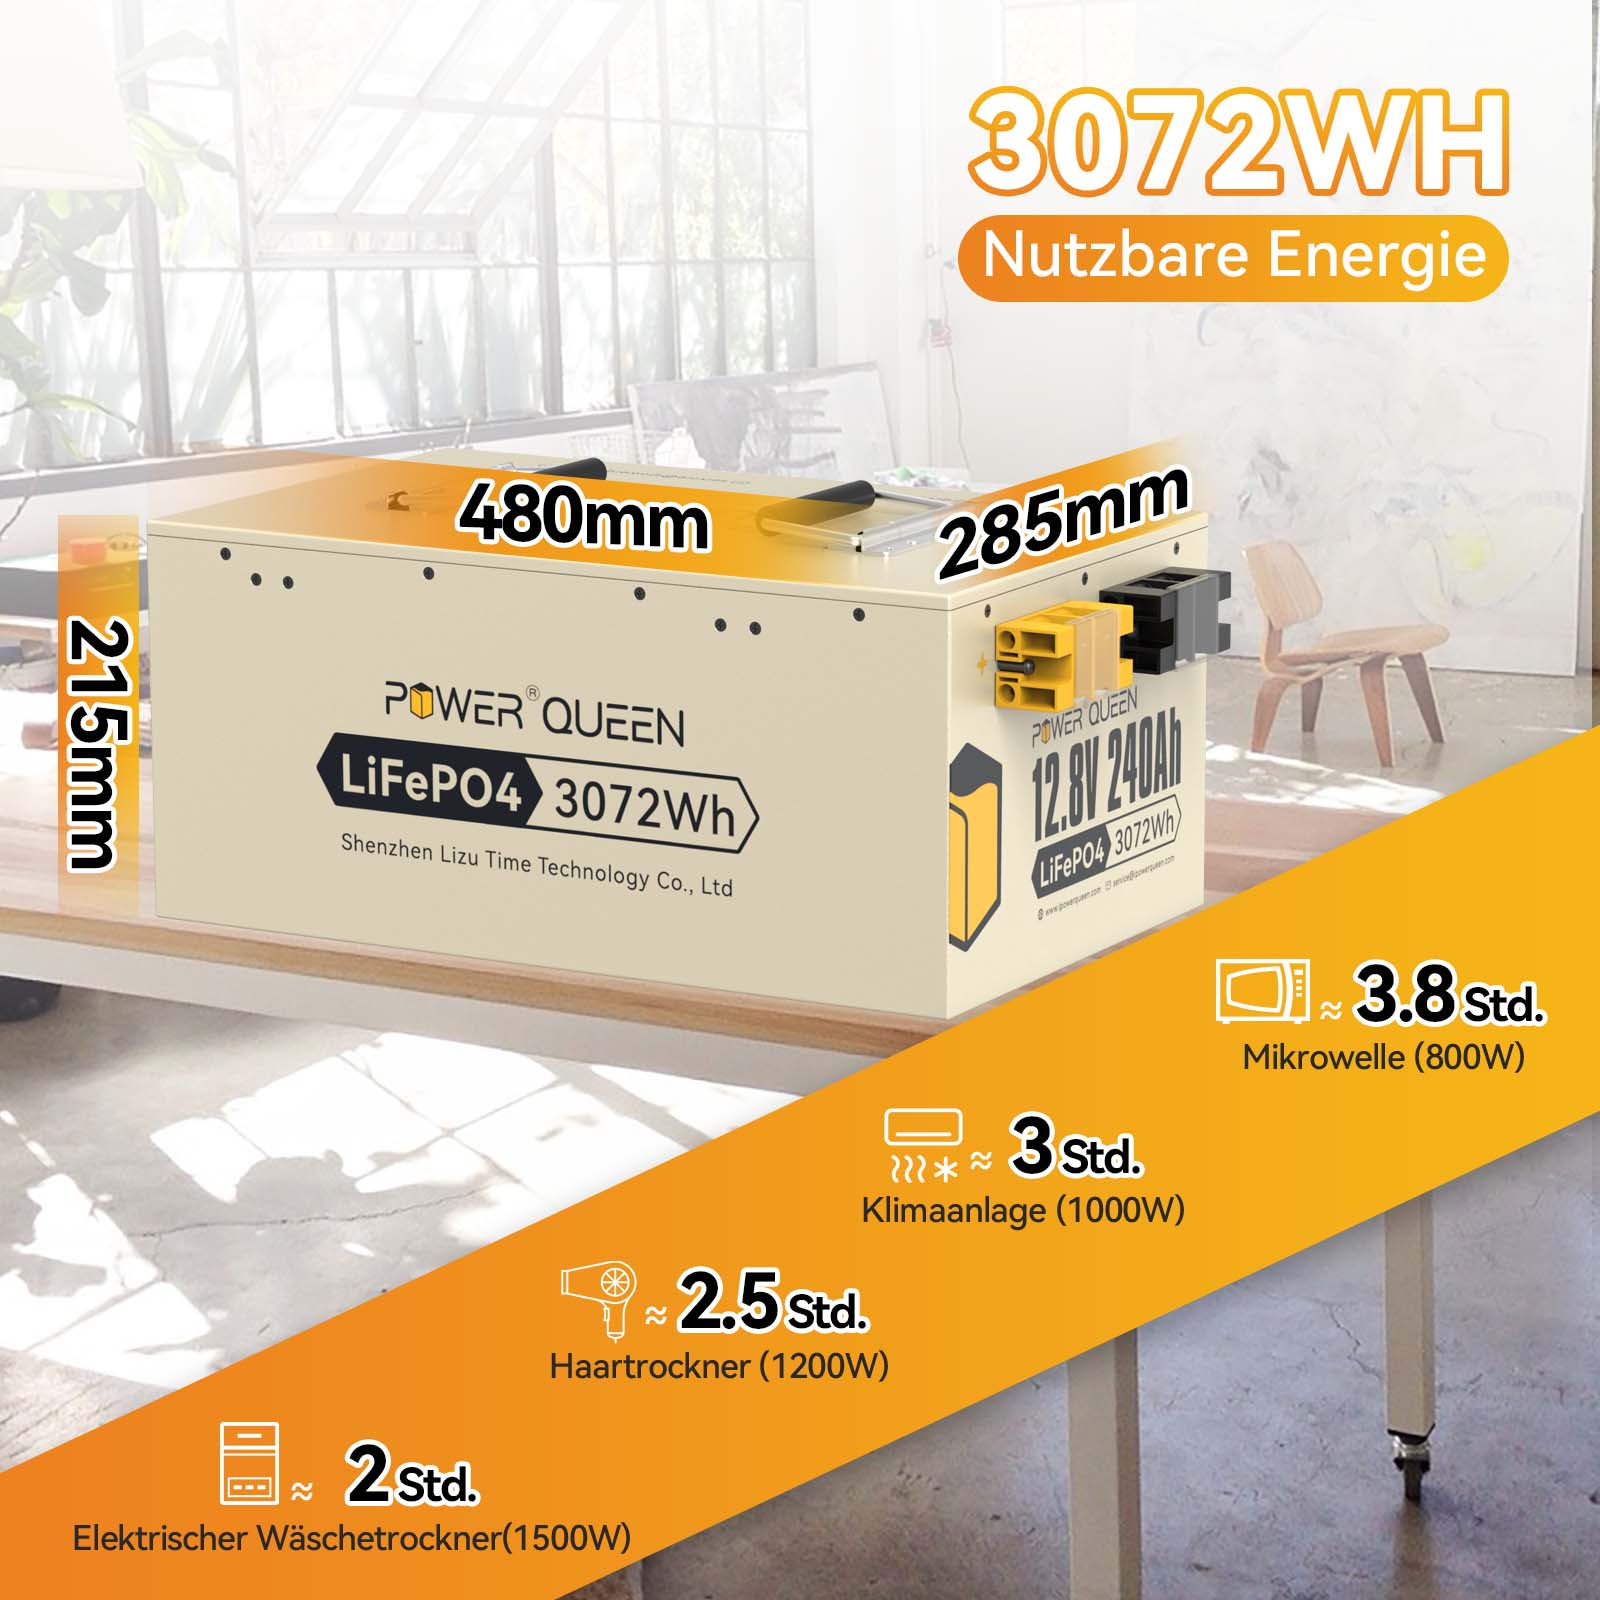 Power Queen 12.8V 240Ah LiFePO4 battery, built-in 150A BMS